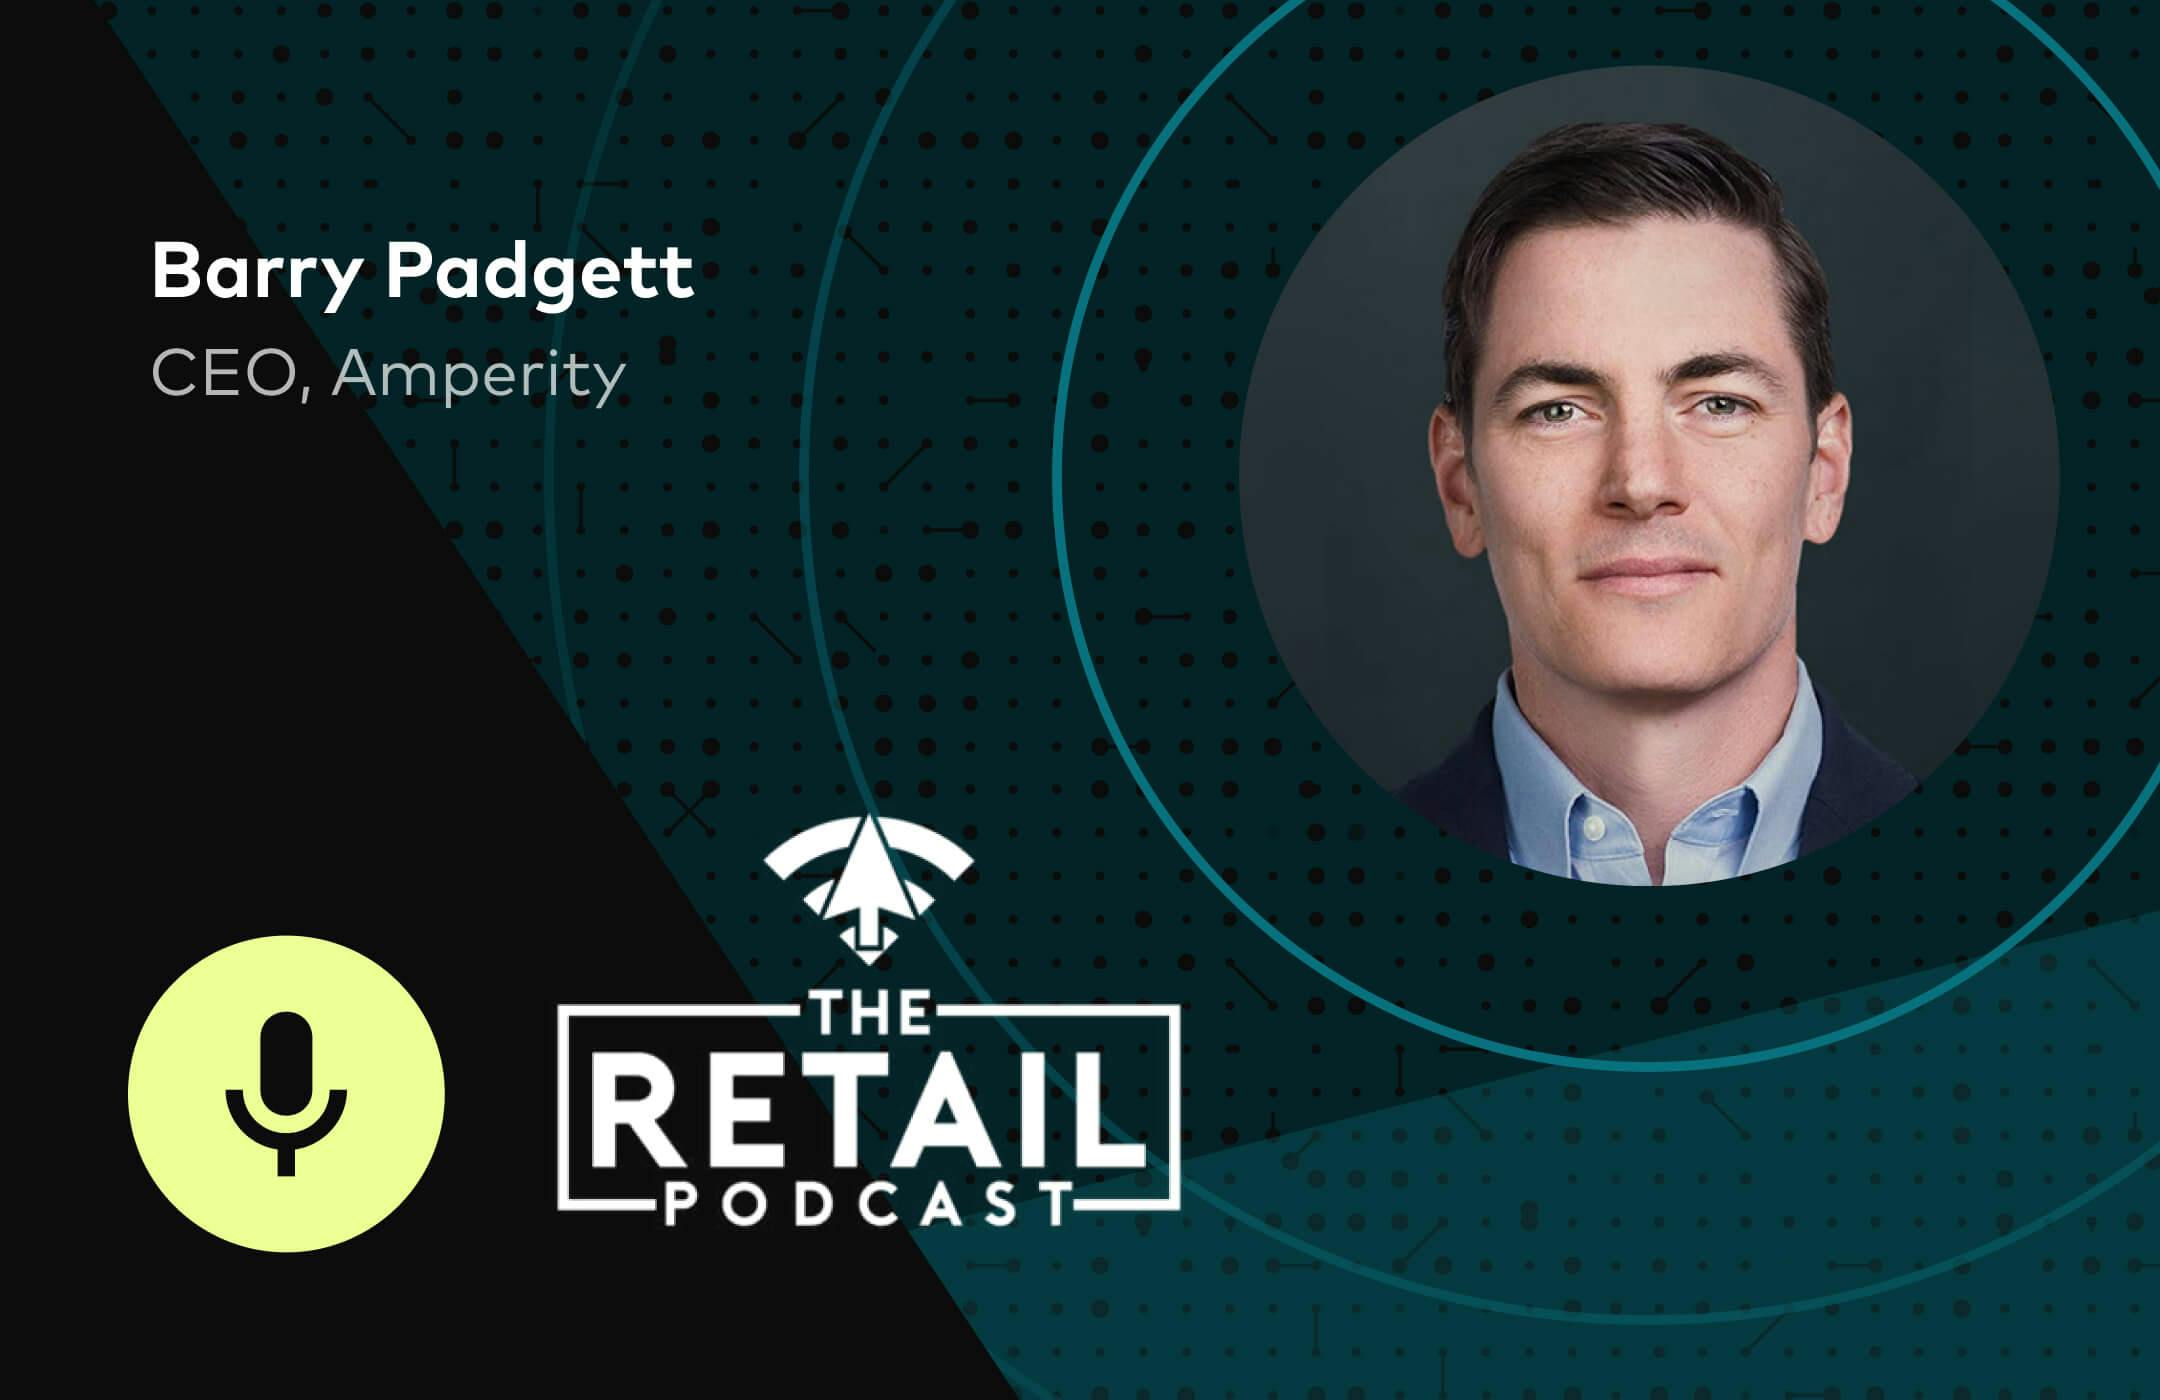 hero image of Amperity CEO Barry Padgett on the Retail Podcast